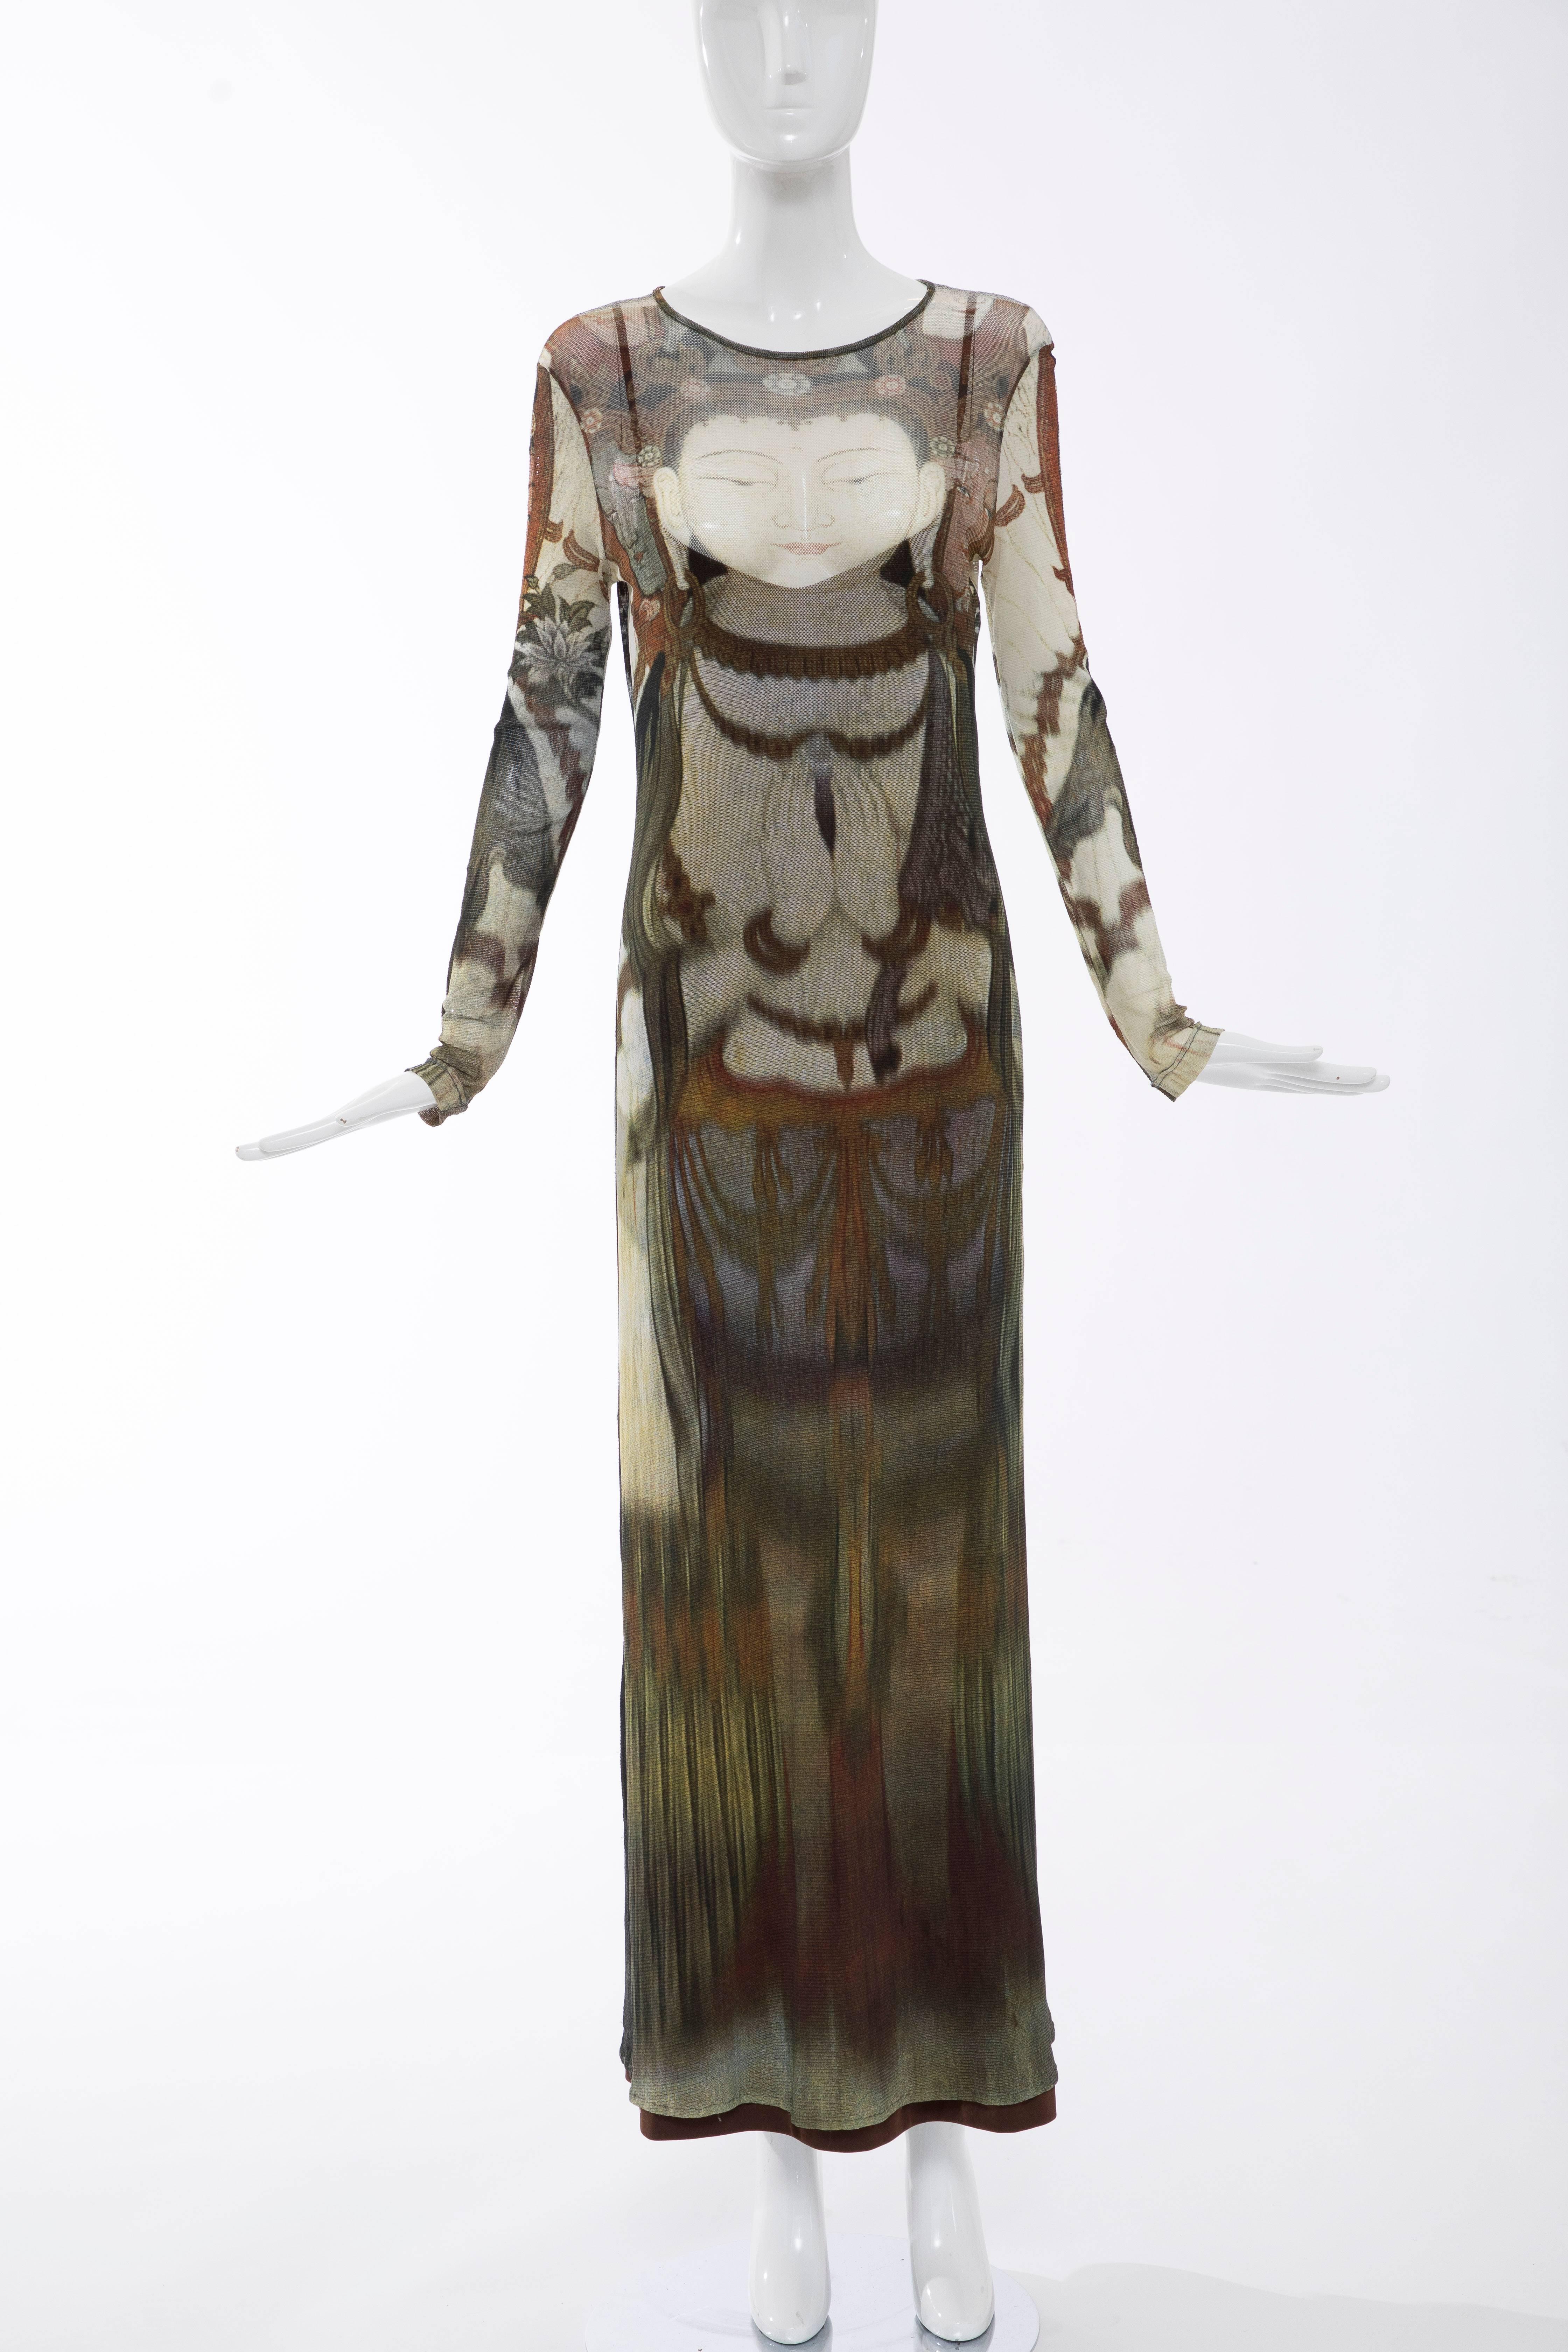 Vivienne Tam, circa 1990's long sleeve printed stretch knit maxi dress from the Buddah Collection with brown slip dress.

Size: 2
US. Medium

Bust 40, Waist 34, Hips 42, Length 57